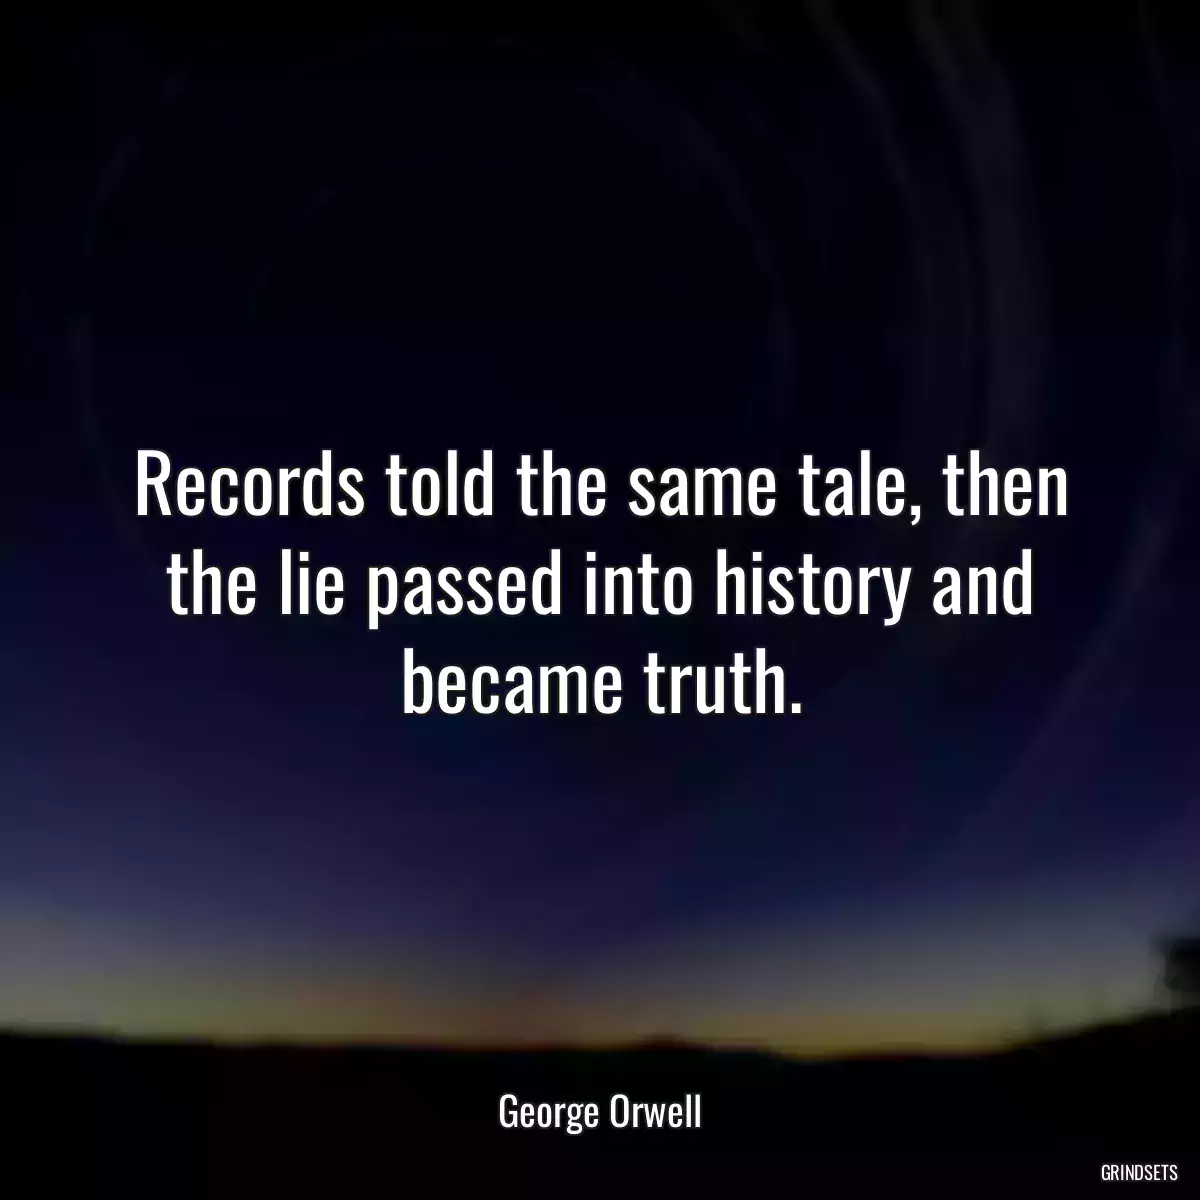 Records told the same tale, then the lie passed into history and became truth.